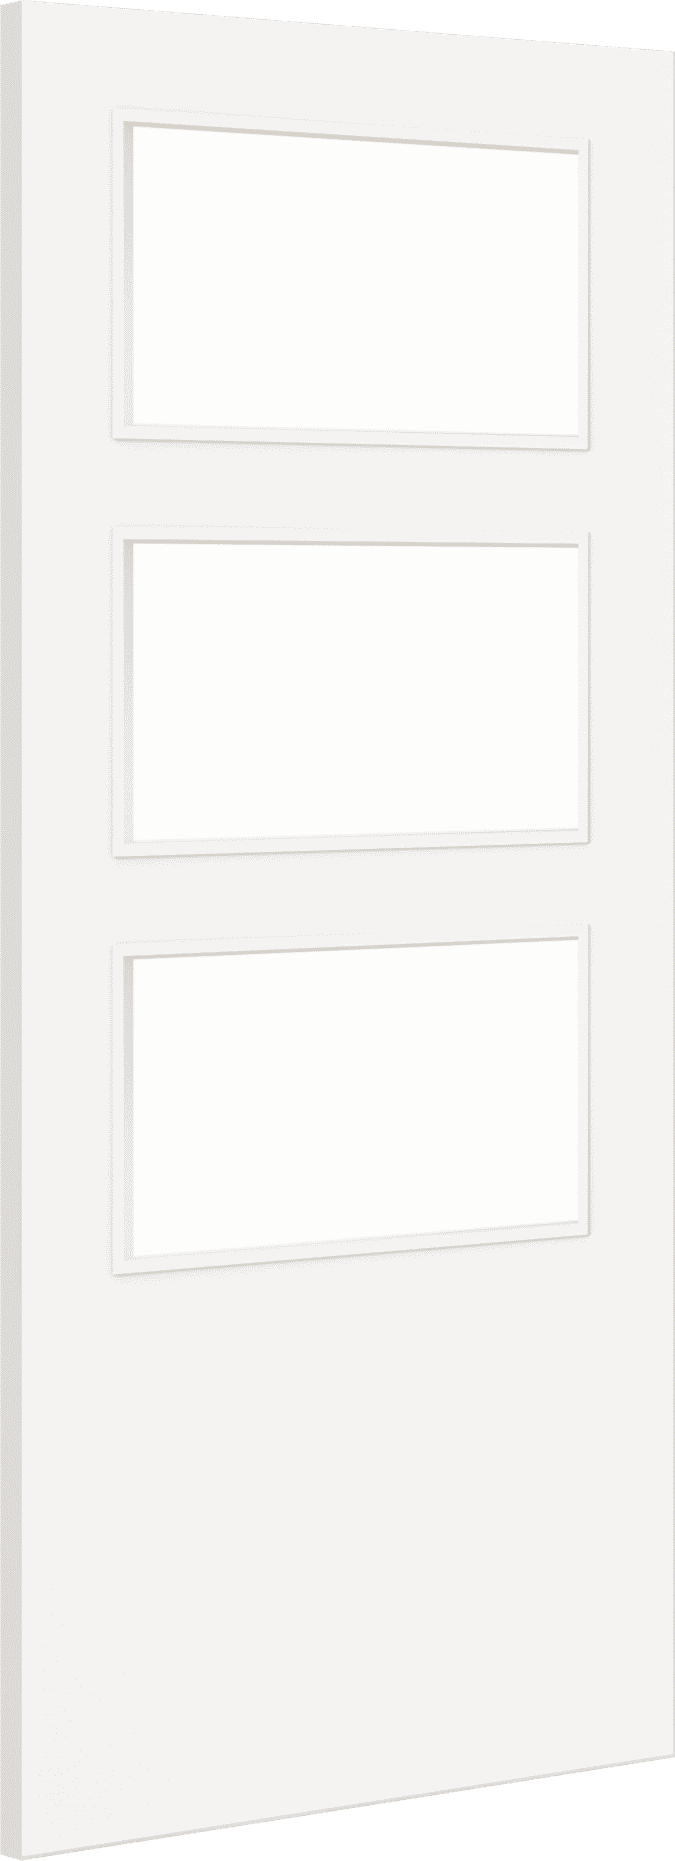 1981mm x 838mm x 44mm (33") Architectural Paint Grade White 03 Clear Glazed Fire Door Blank